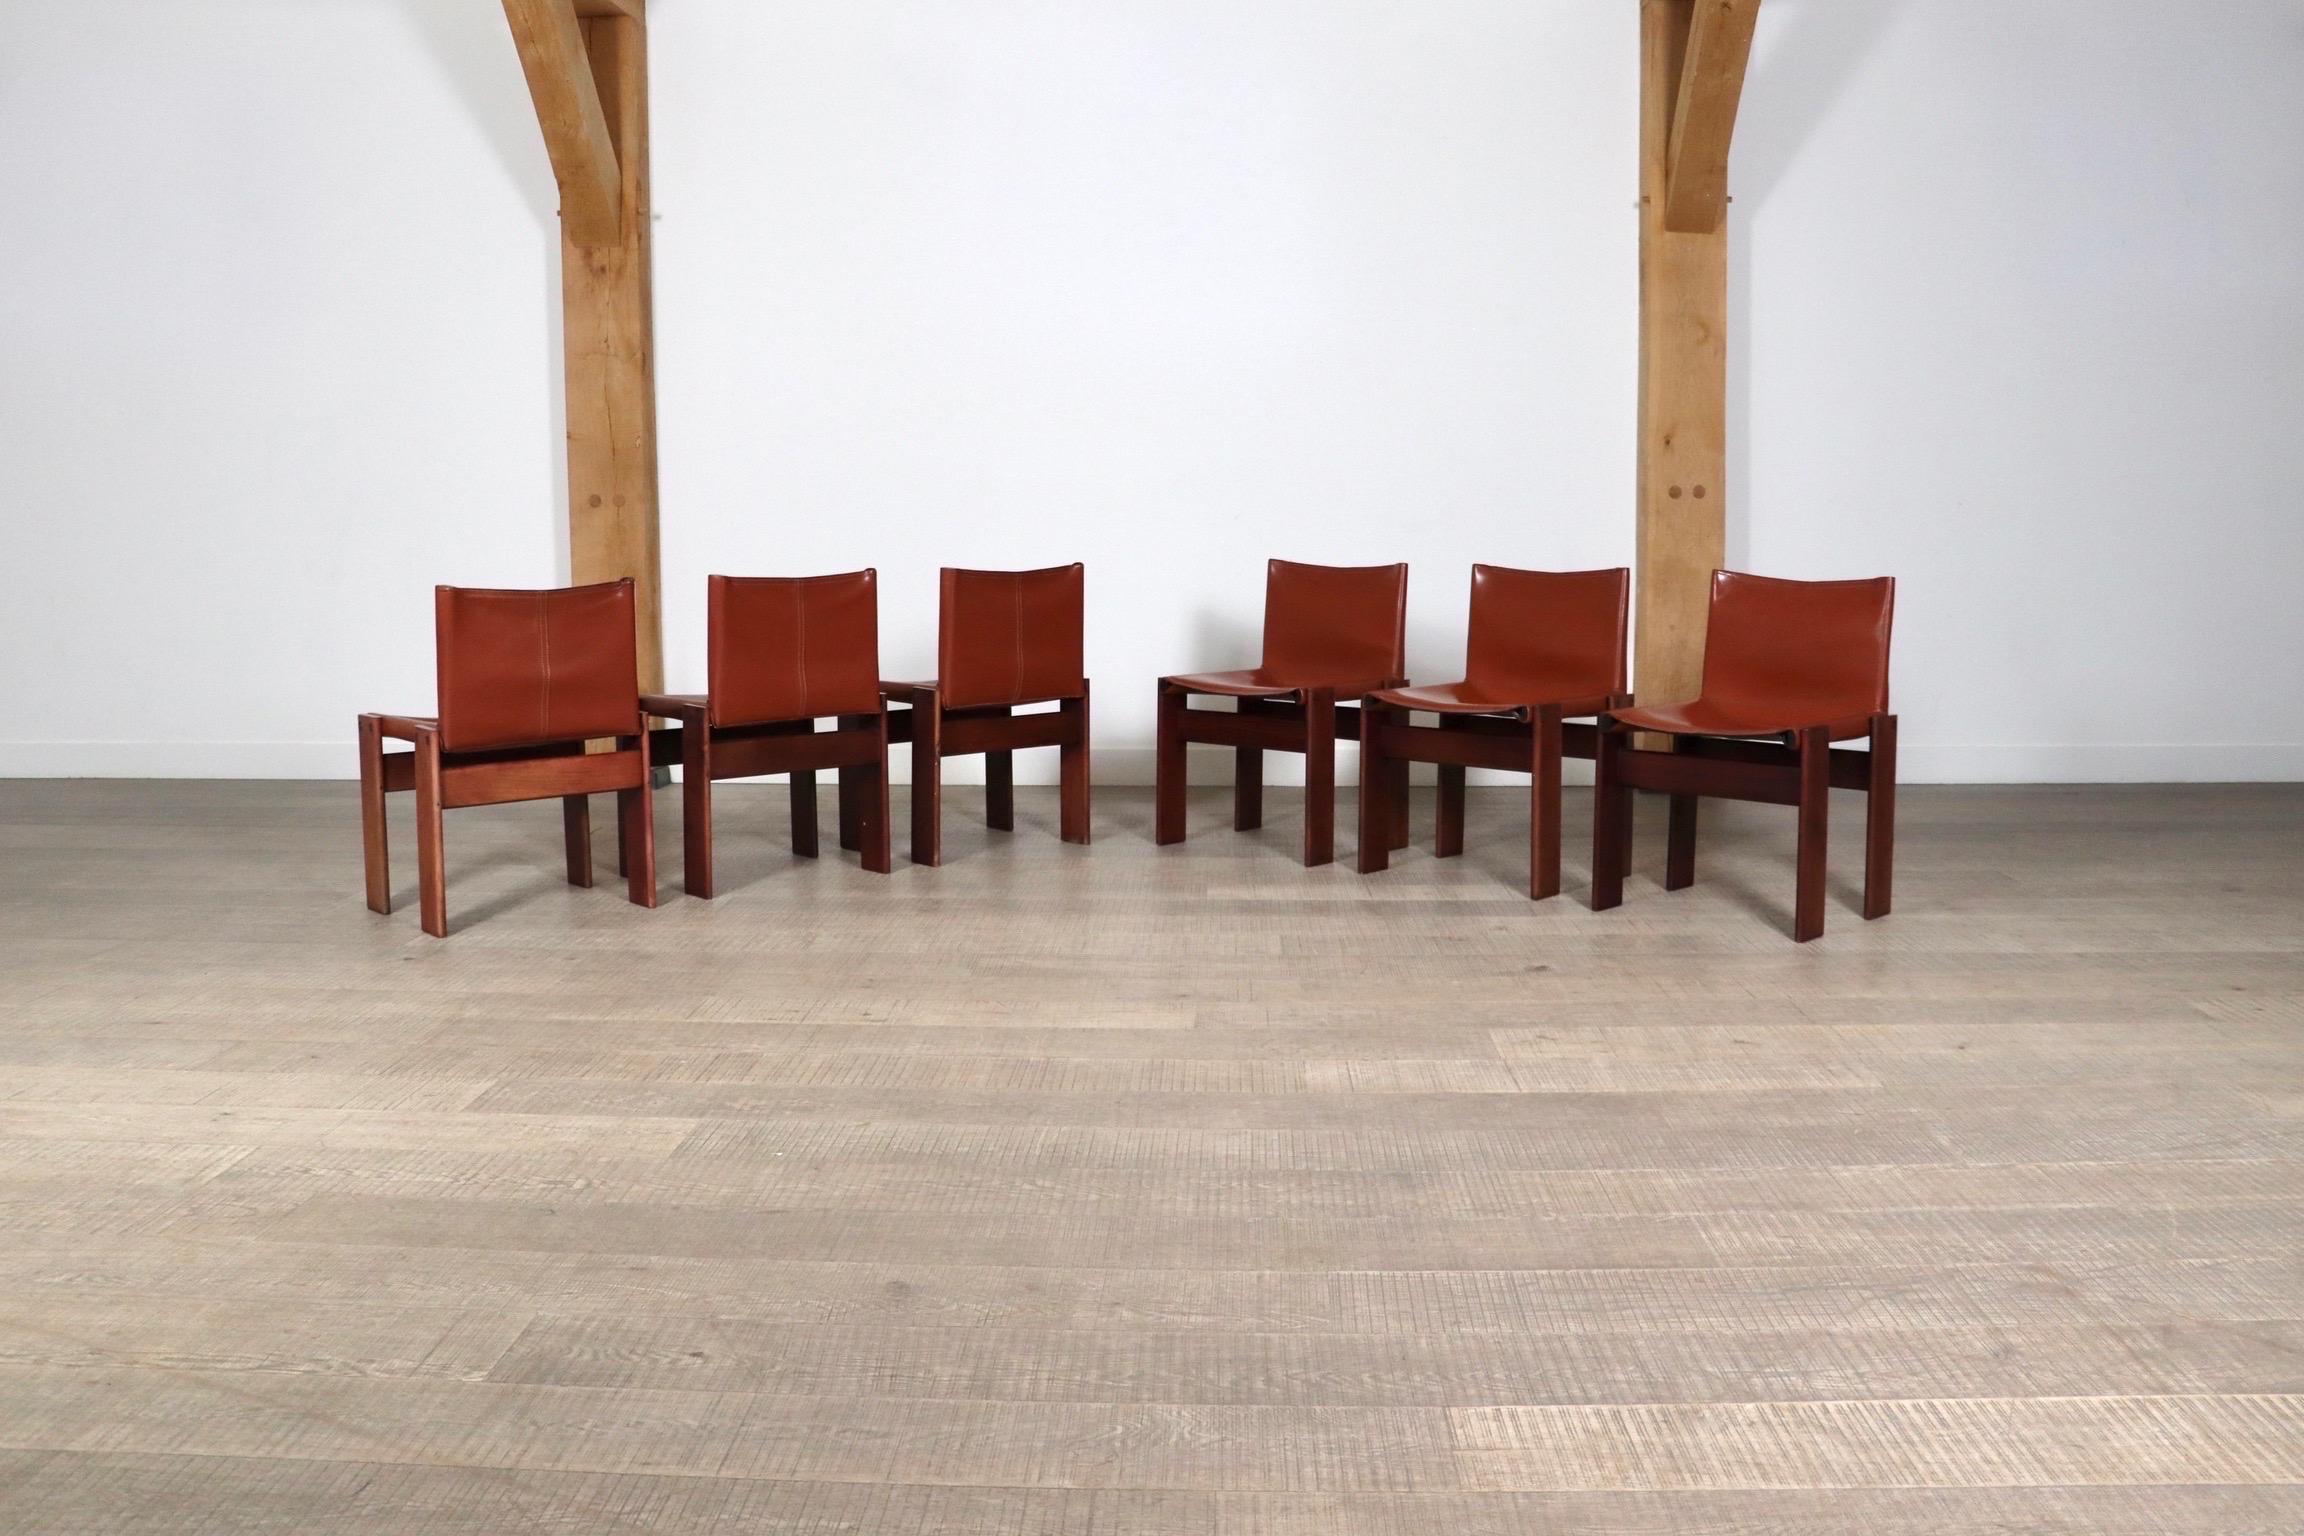 Fantastic set of 6 ‘Monk’ chairs designed by Afra and Tobia Scarpa for Molteni, Italy 1974. This design features a solid walnut wooden frame with nicely patinated deep cognac leather seating. The sober design, after its name “Monk” is complemented